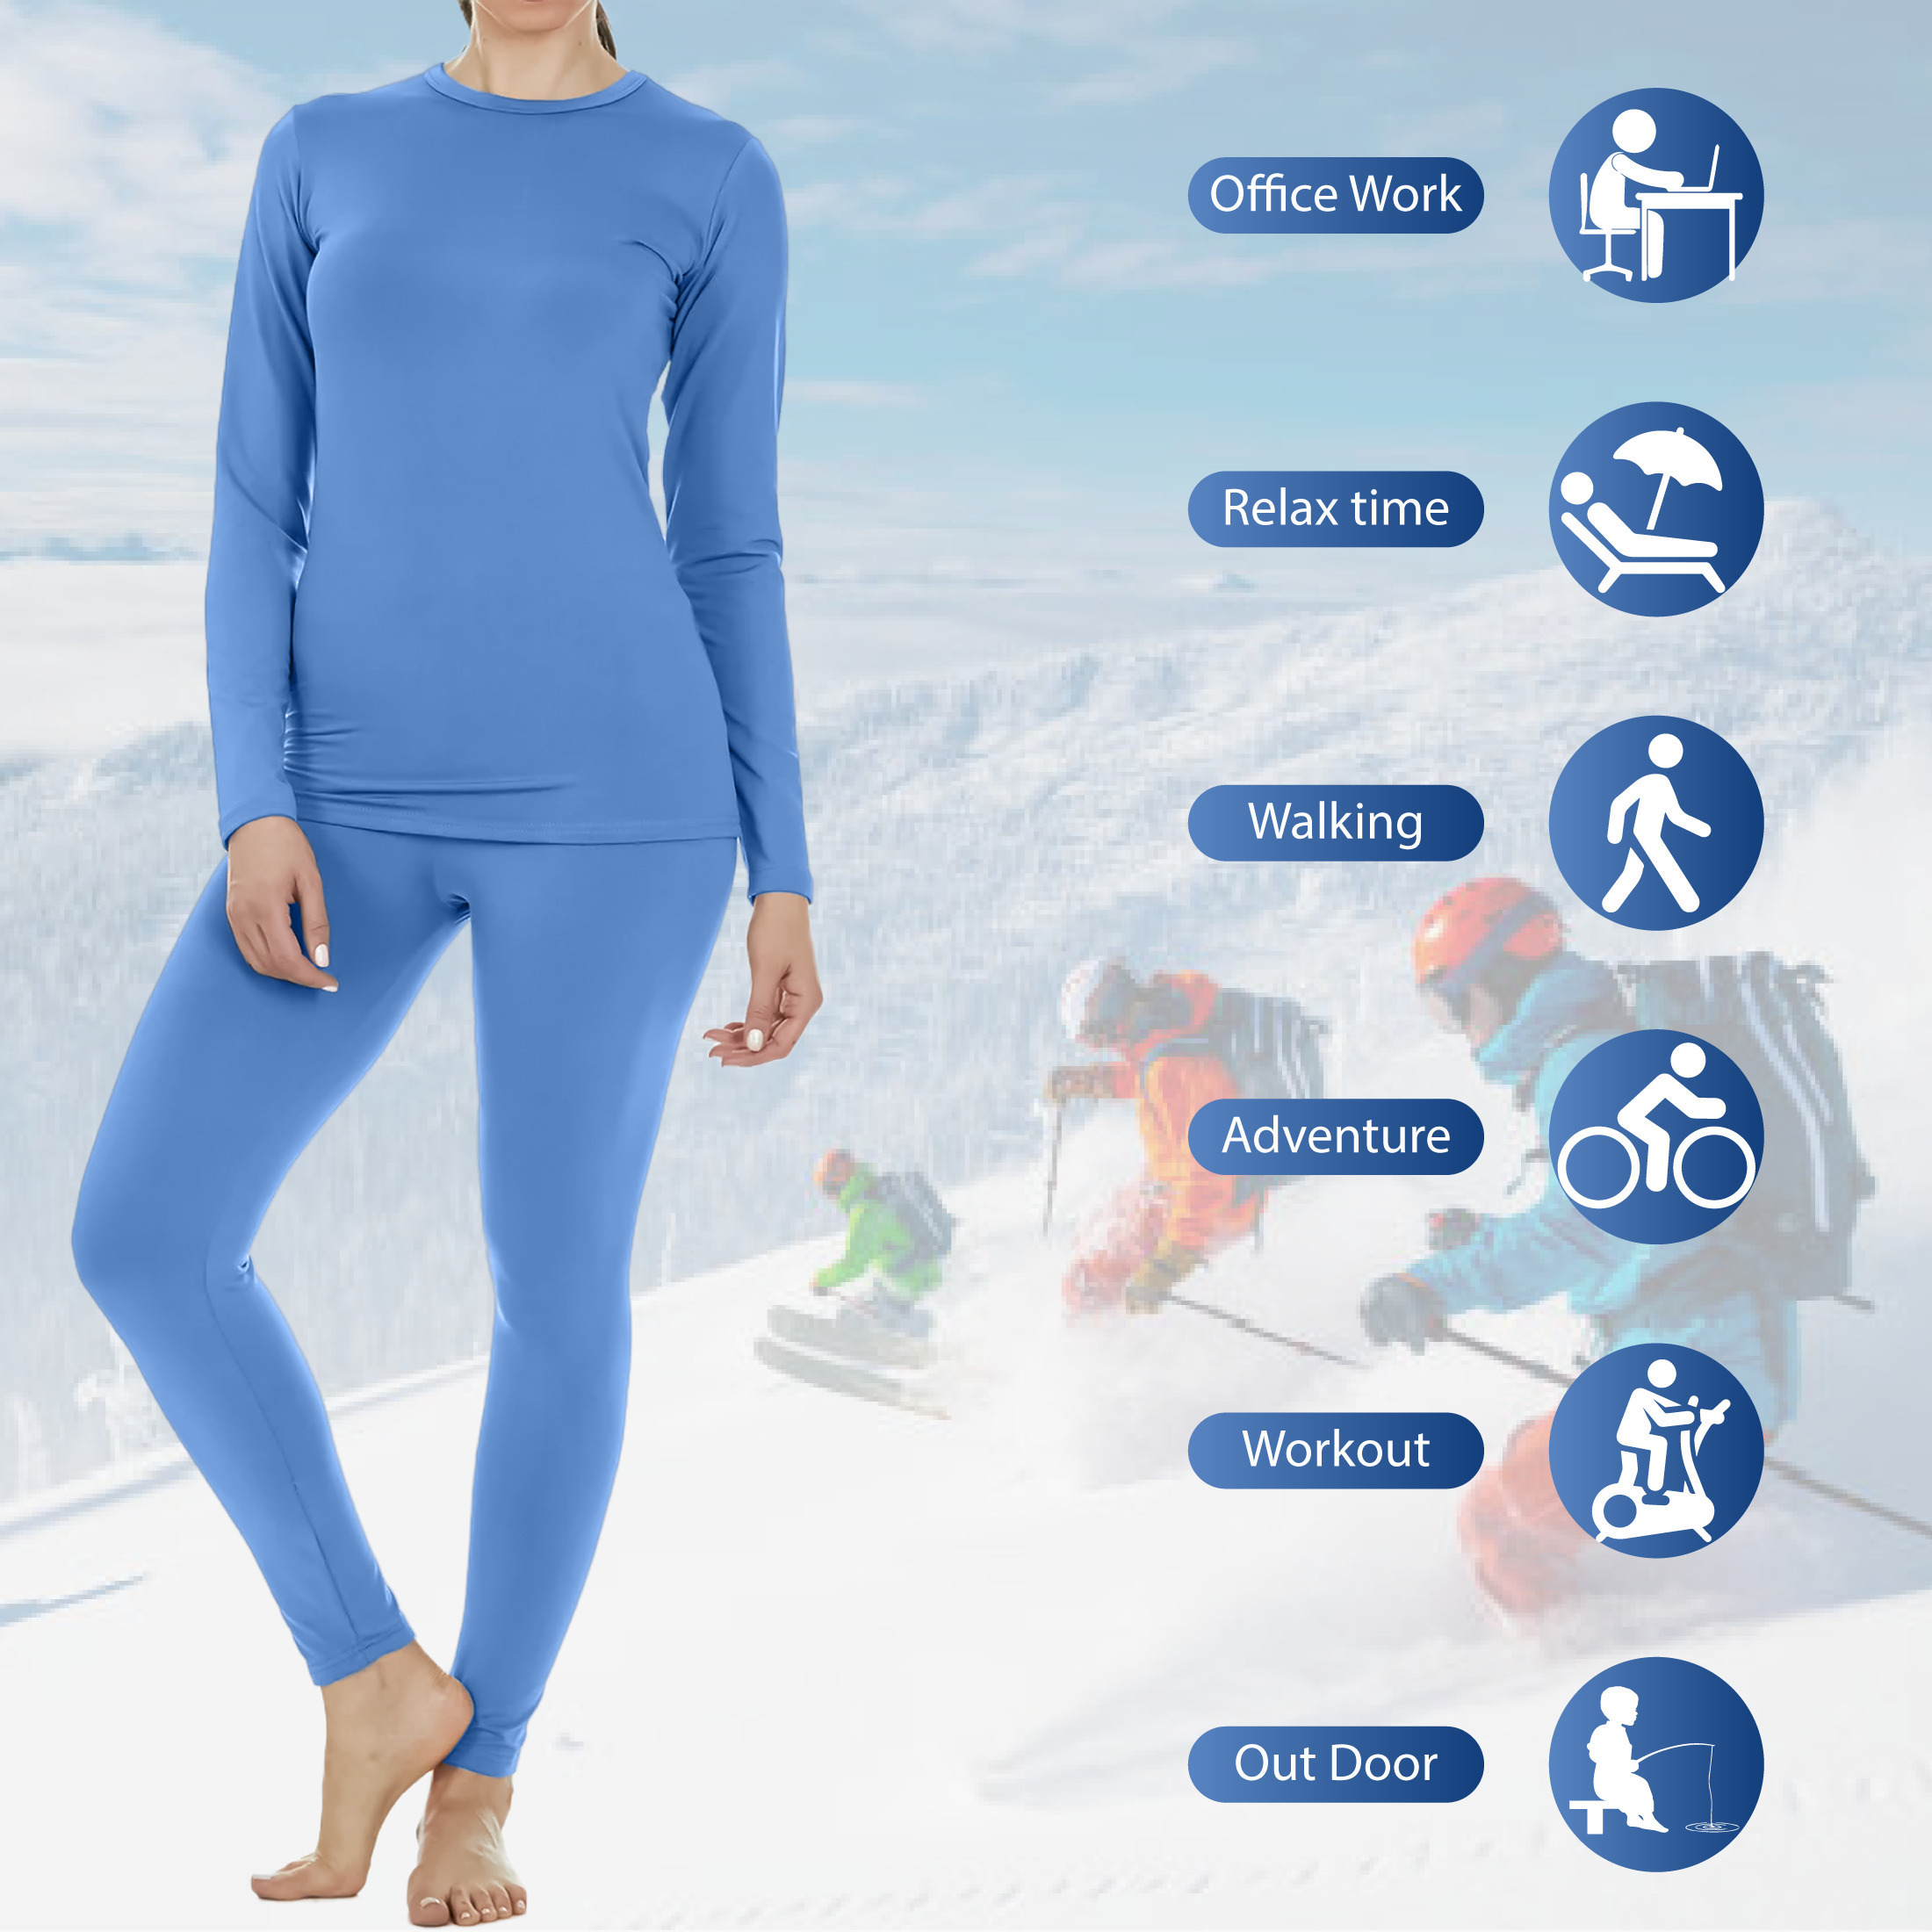 3 Sets: Women's Fleece Lined Thermal Sets For Cold Weather - Small